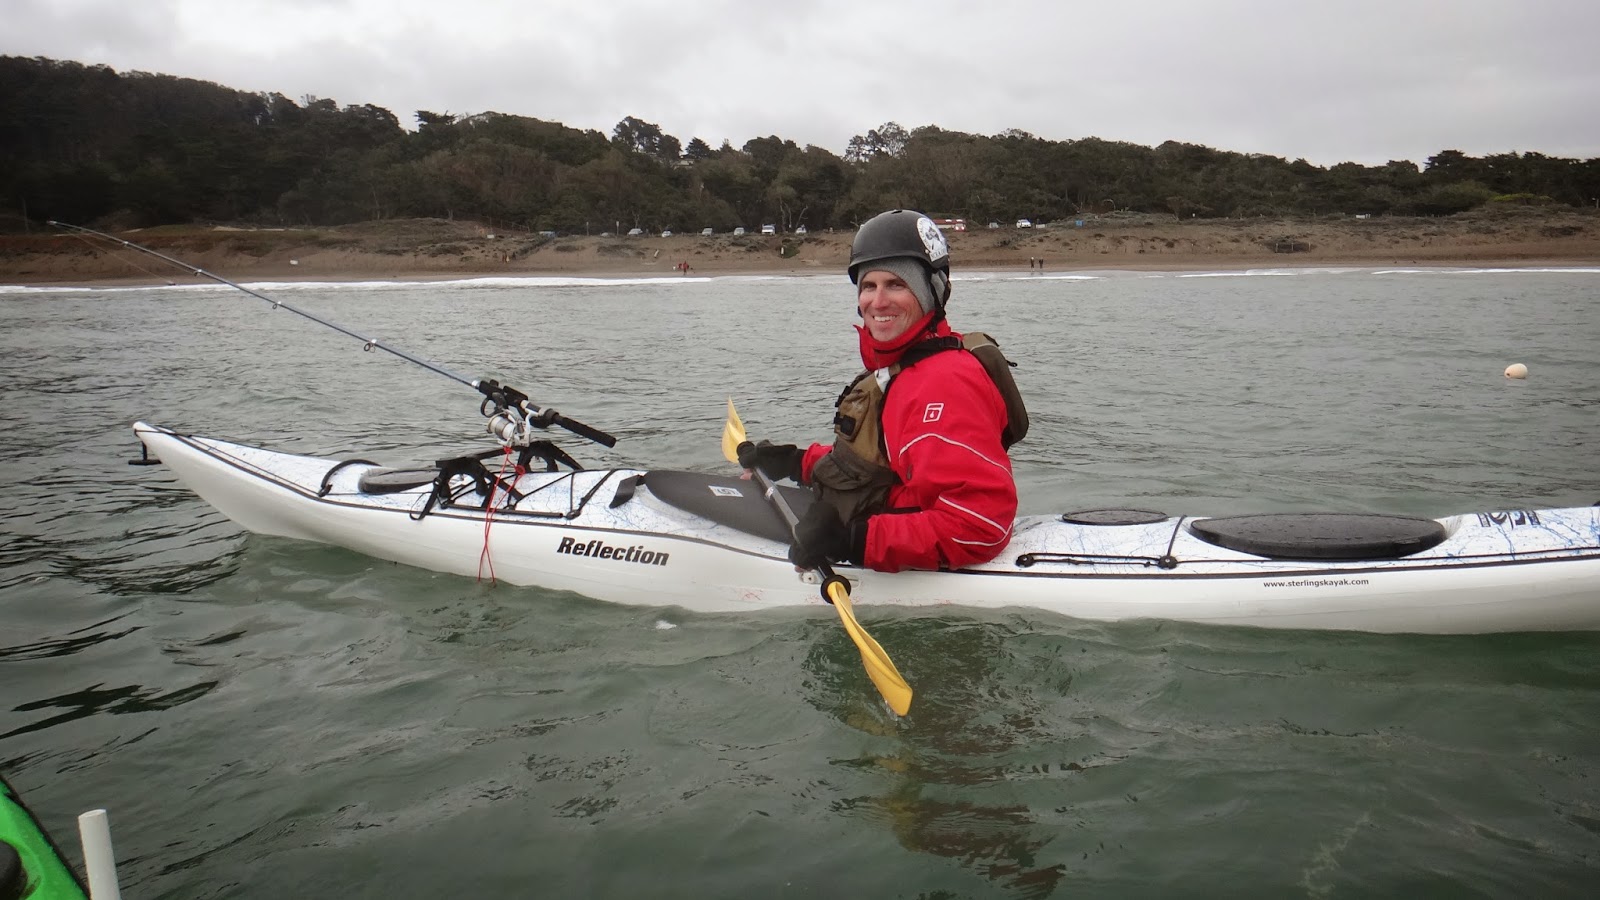 Headwaters Fishing Team: Sea Kayak Fishing Course at Golden Gate